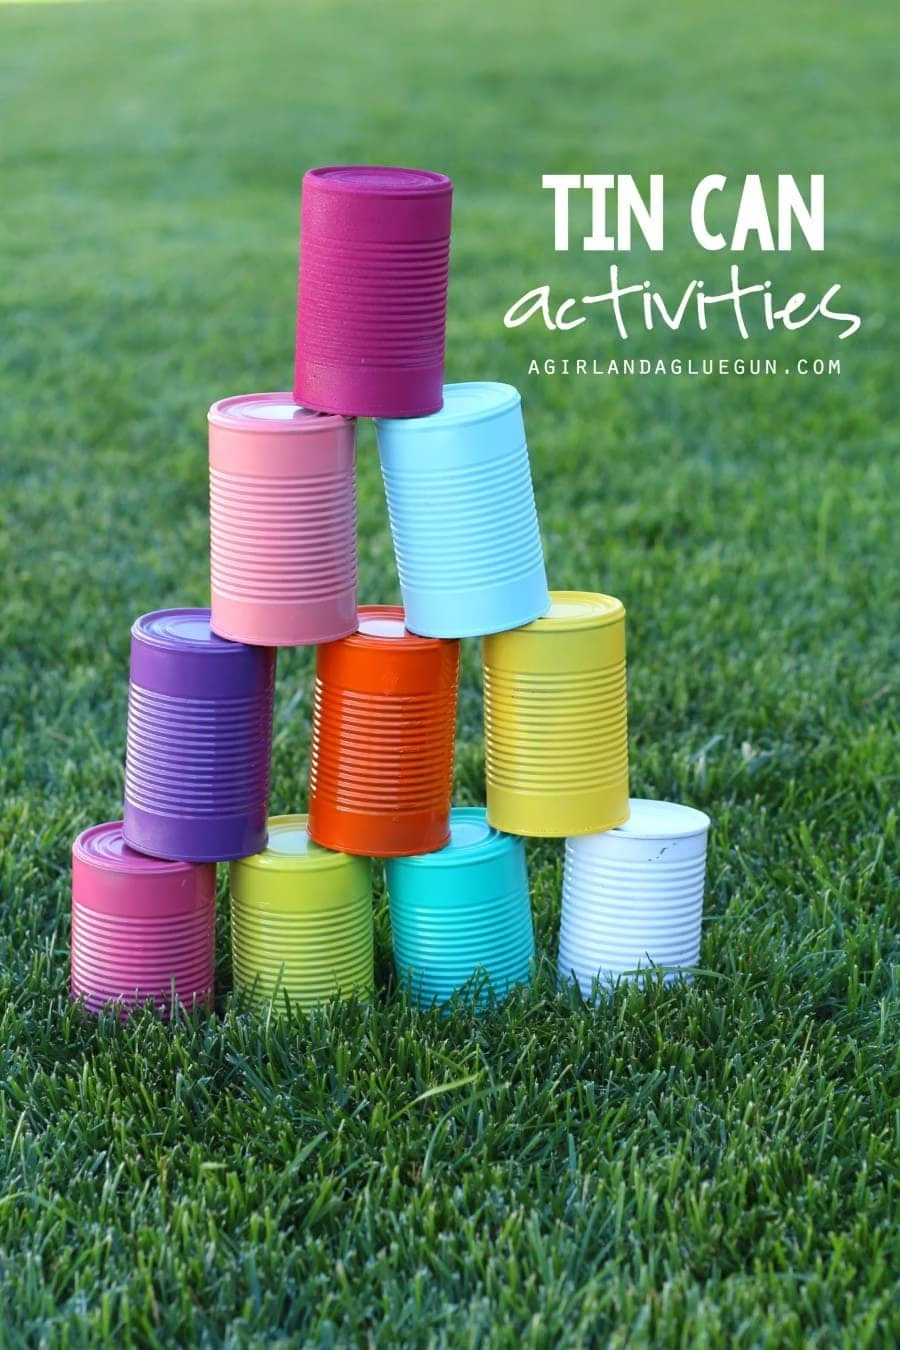 Backyard Activities For Kids - Save Some Tin Cans